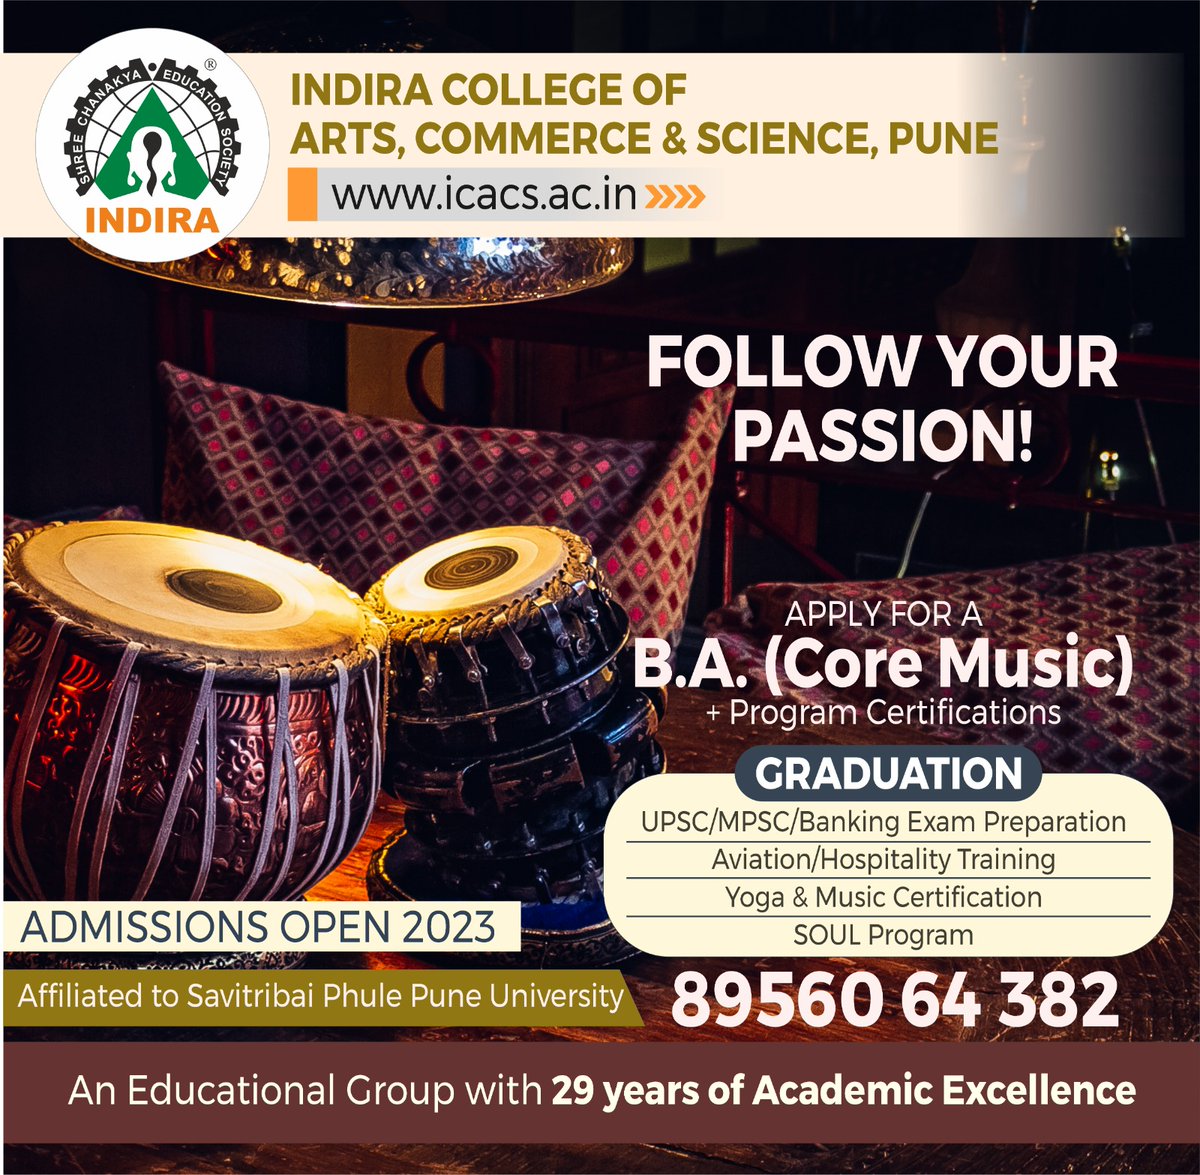 Turn up the volume on your dreams and make your love for music your ultimate career 🎶🎤

For more details visit - icacs.ac.in

#musiclover #musiccareer #followyourpassion #JoinUs #Education #AdmissionsOpen #ApplyNow #icacs #indiragroupofinstitutes #indira #pune